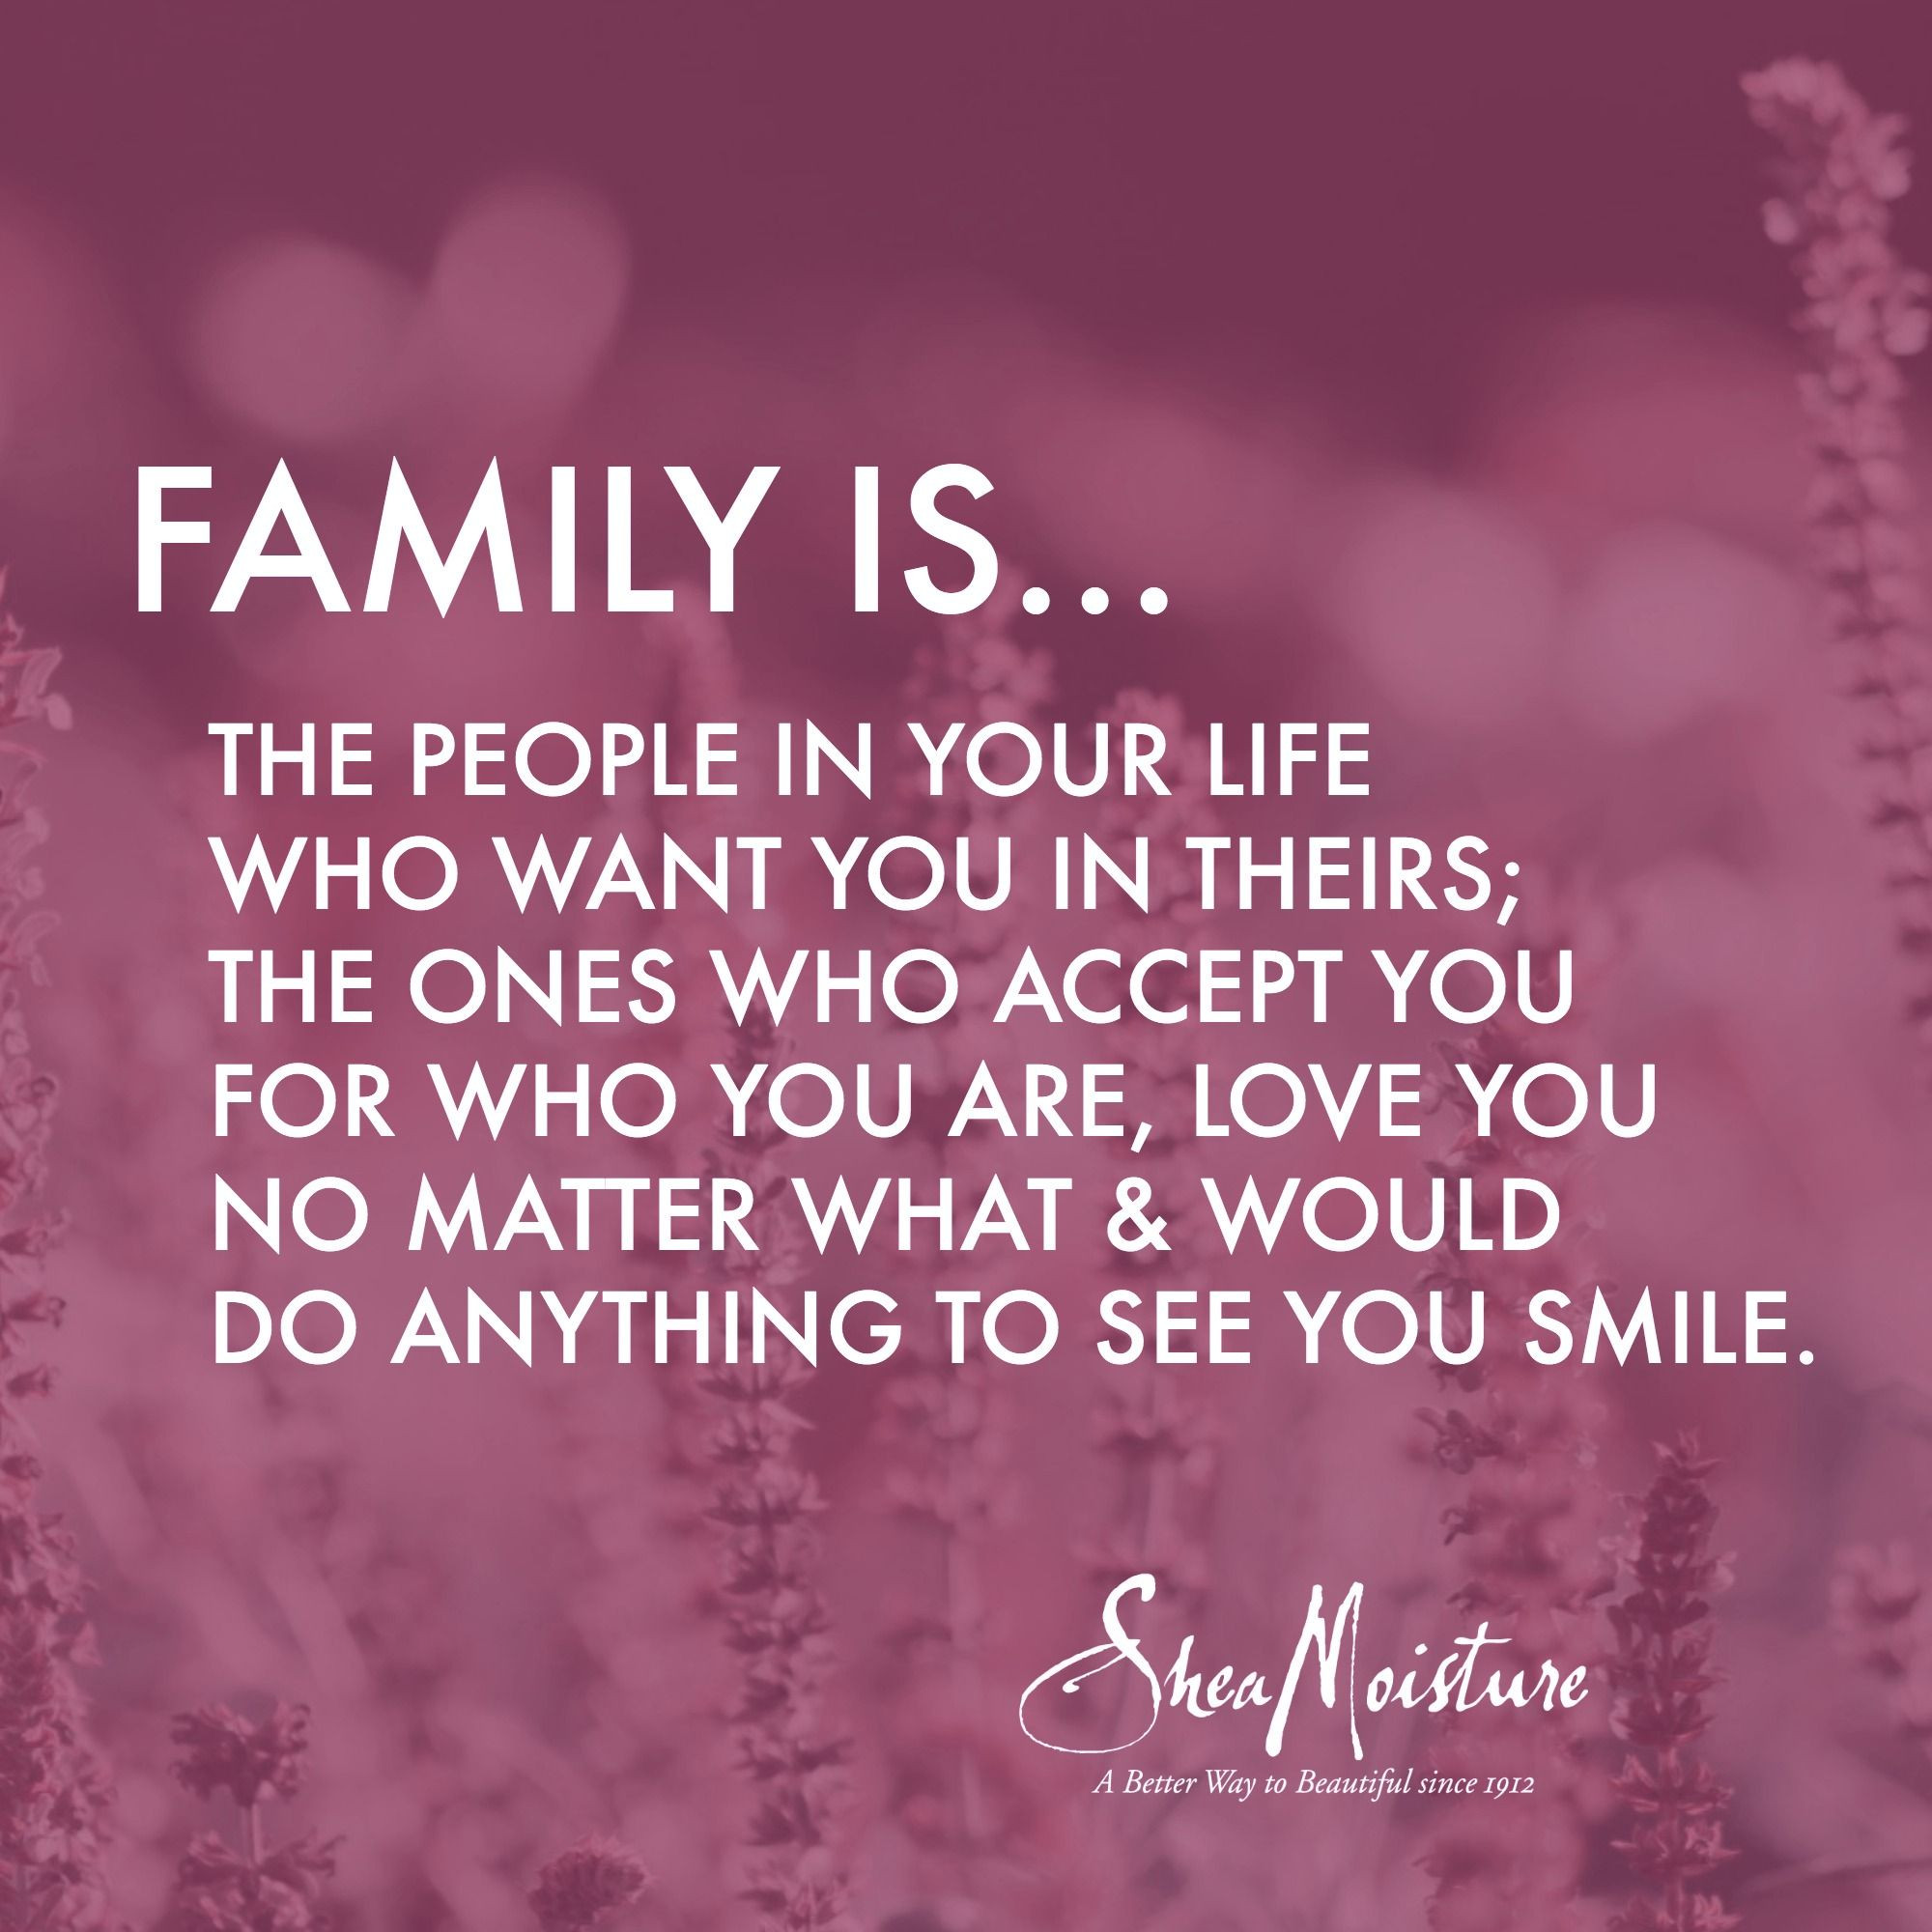 Meaningful Quote About Family
 Meaning of family quotes